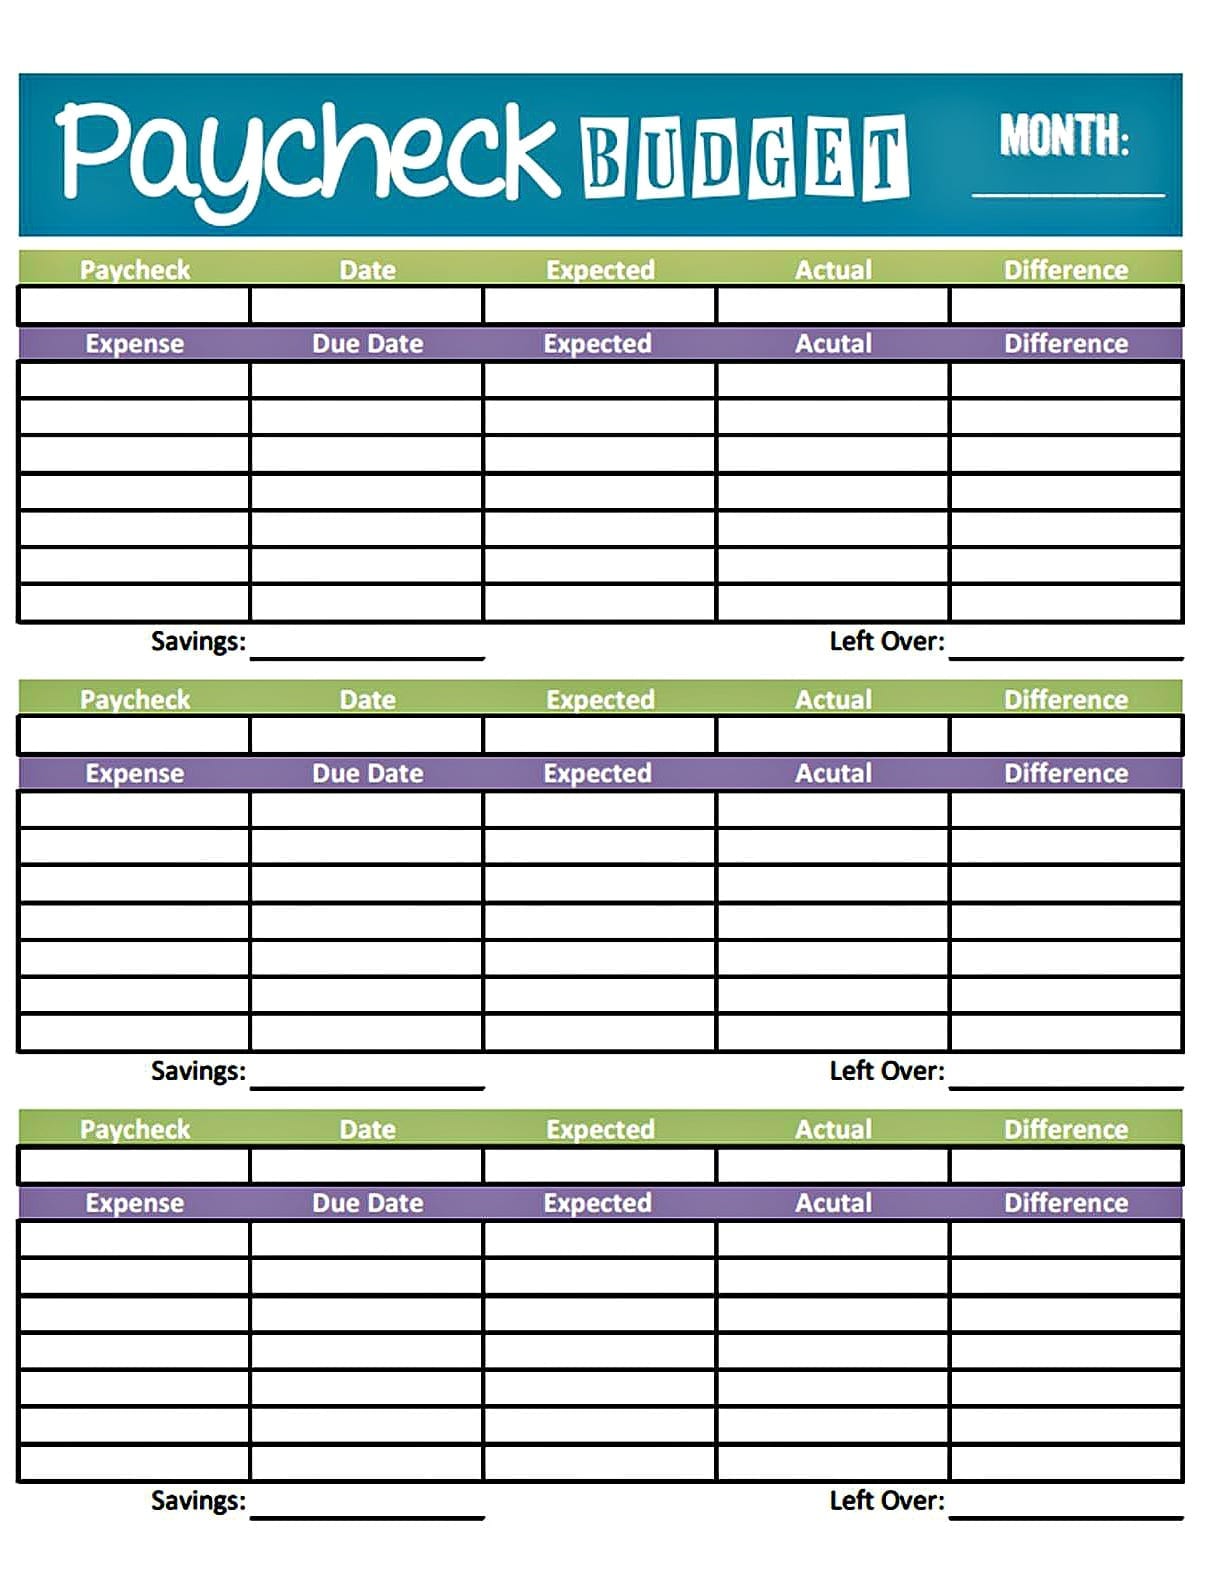 free-monthly-budget-spreadsheet-template-free-spreadsheet-budget-spreadsheet-monthly-spreadsheet